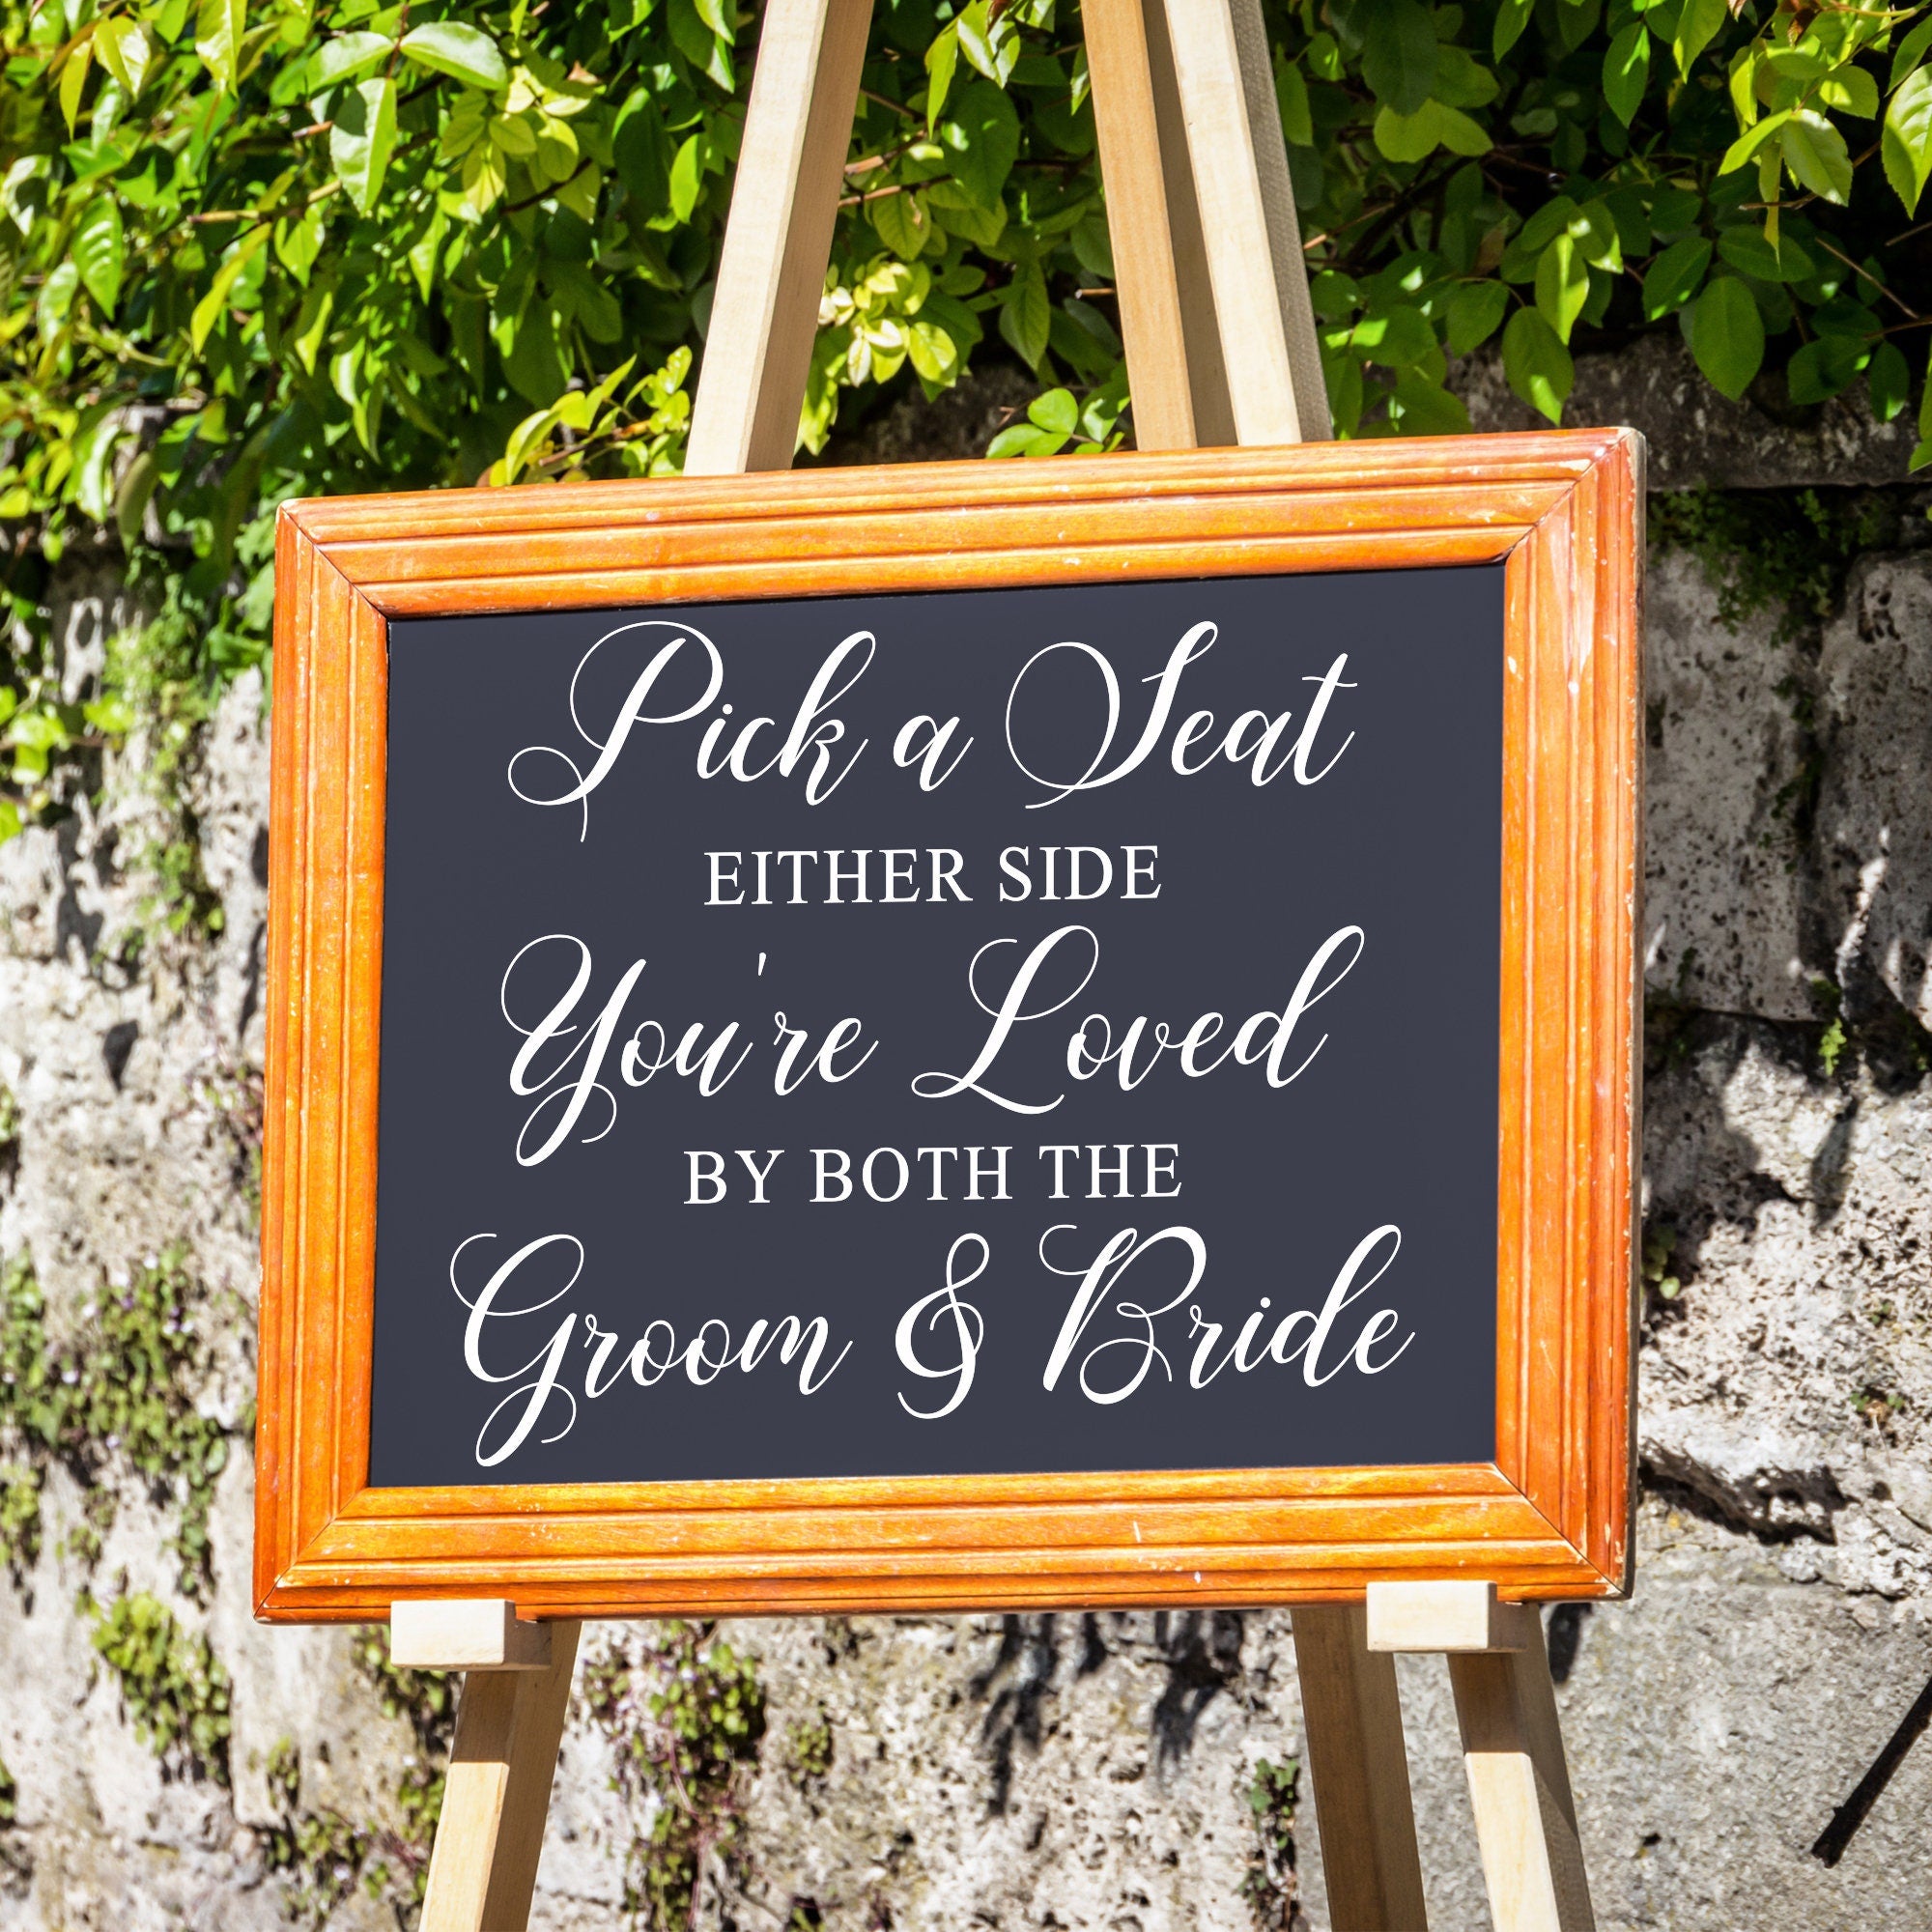 Please find your seat Vinyl Decal please take a seat Make your own wedding  sign